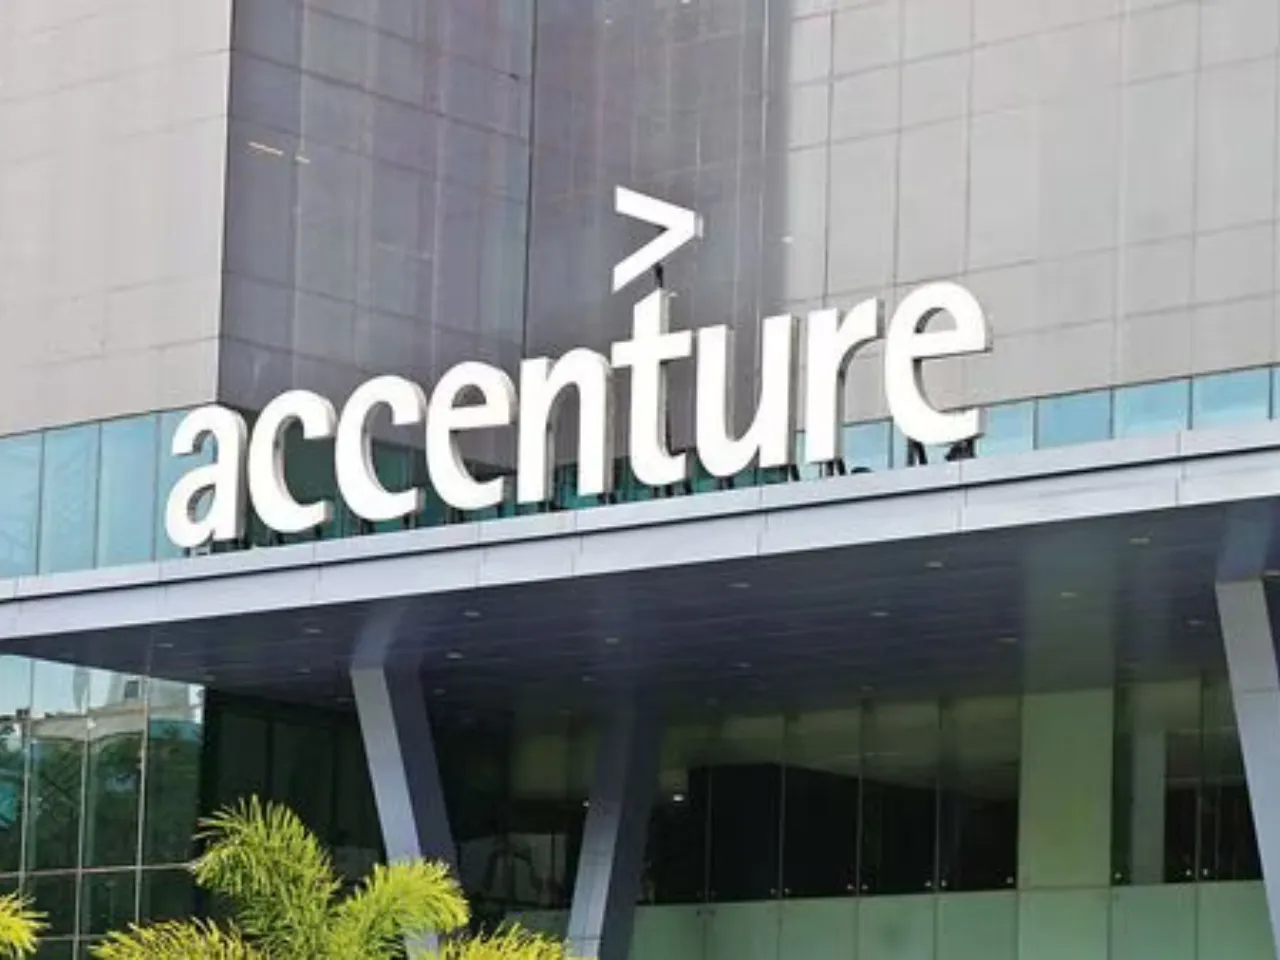 Tech giant Accenture to acquire Solnet for an undisclosed amount